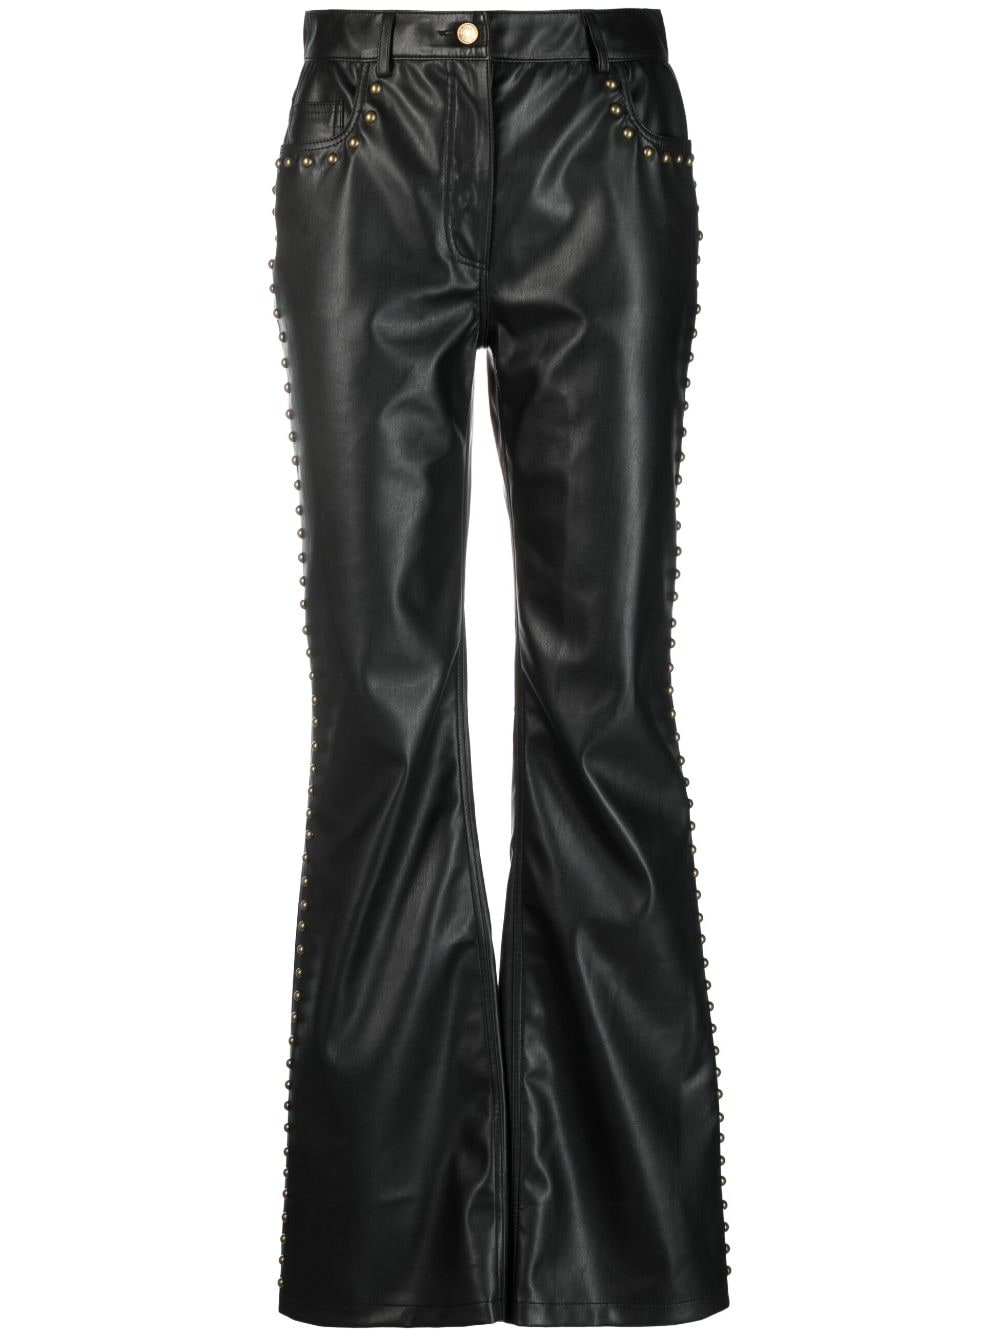 MOSCHINO JEANS stud-detail mid-rise trousers - Black von MOSCHINO JEANS